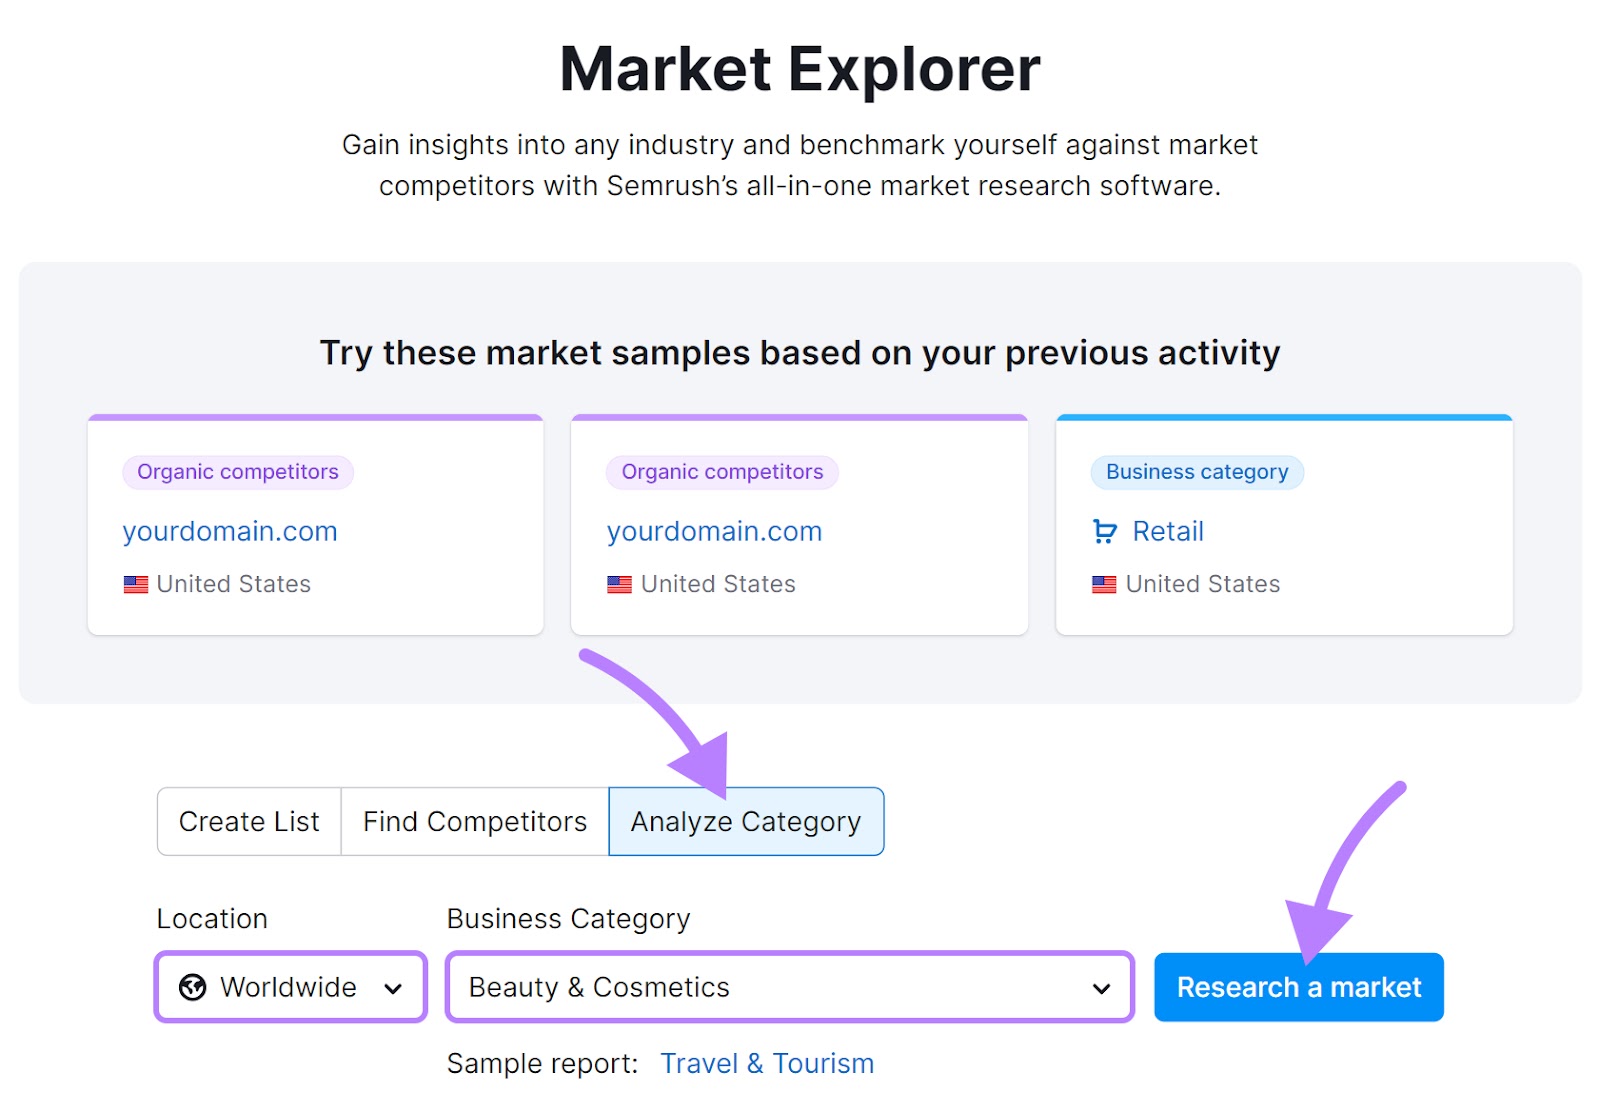 "Beauty & Cosmetics" business category entered into the Market Explorer tool